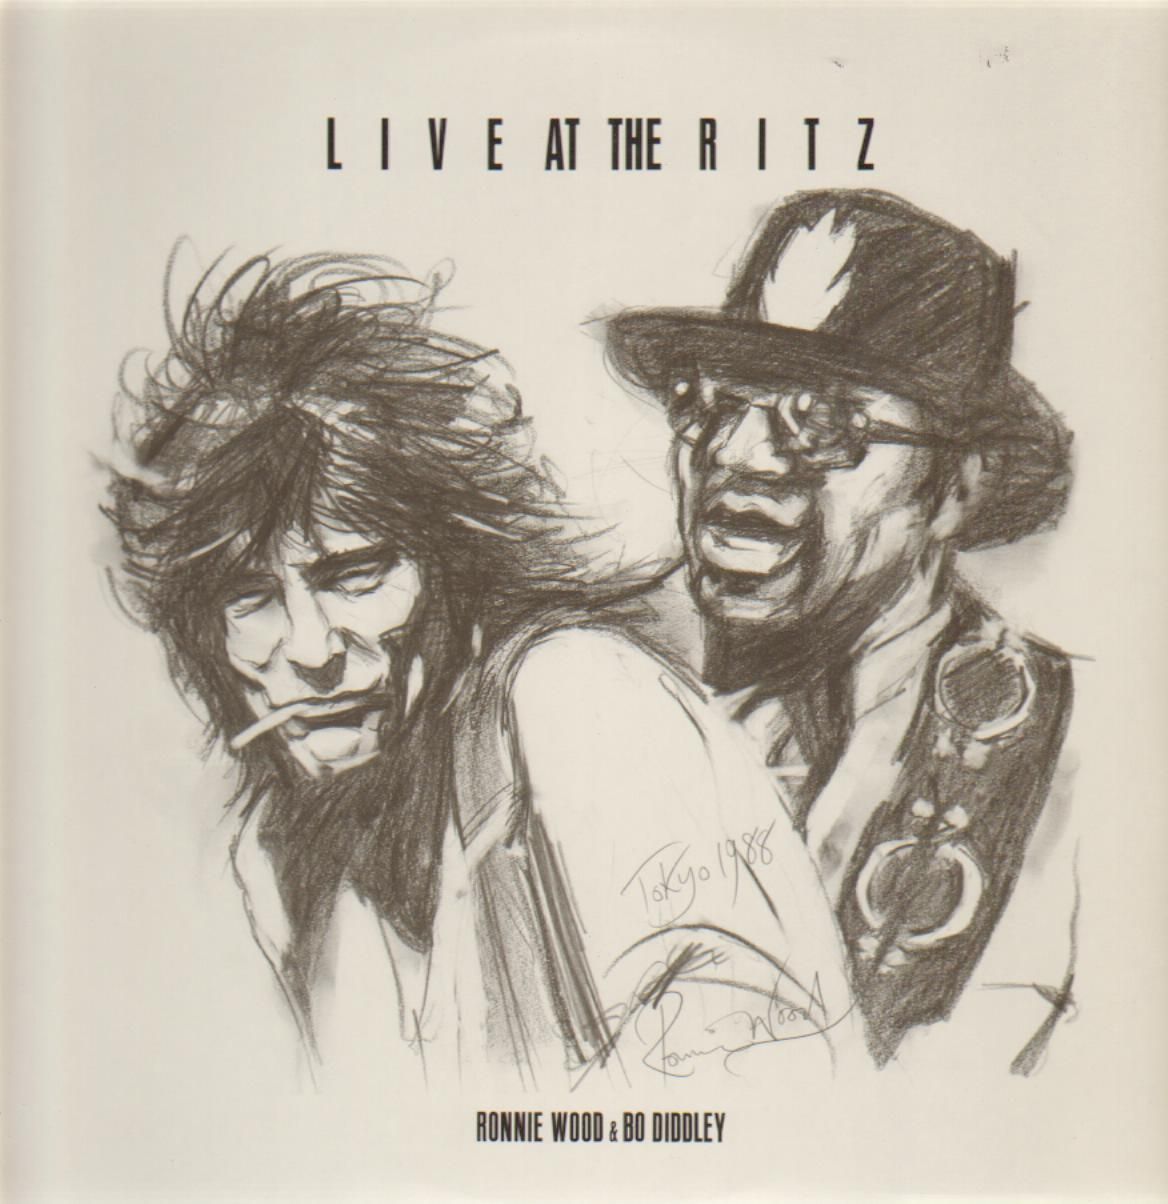 LIVE AT THE RITZ